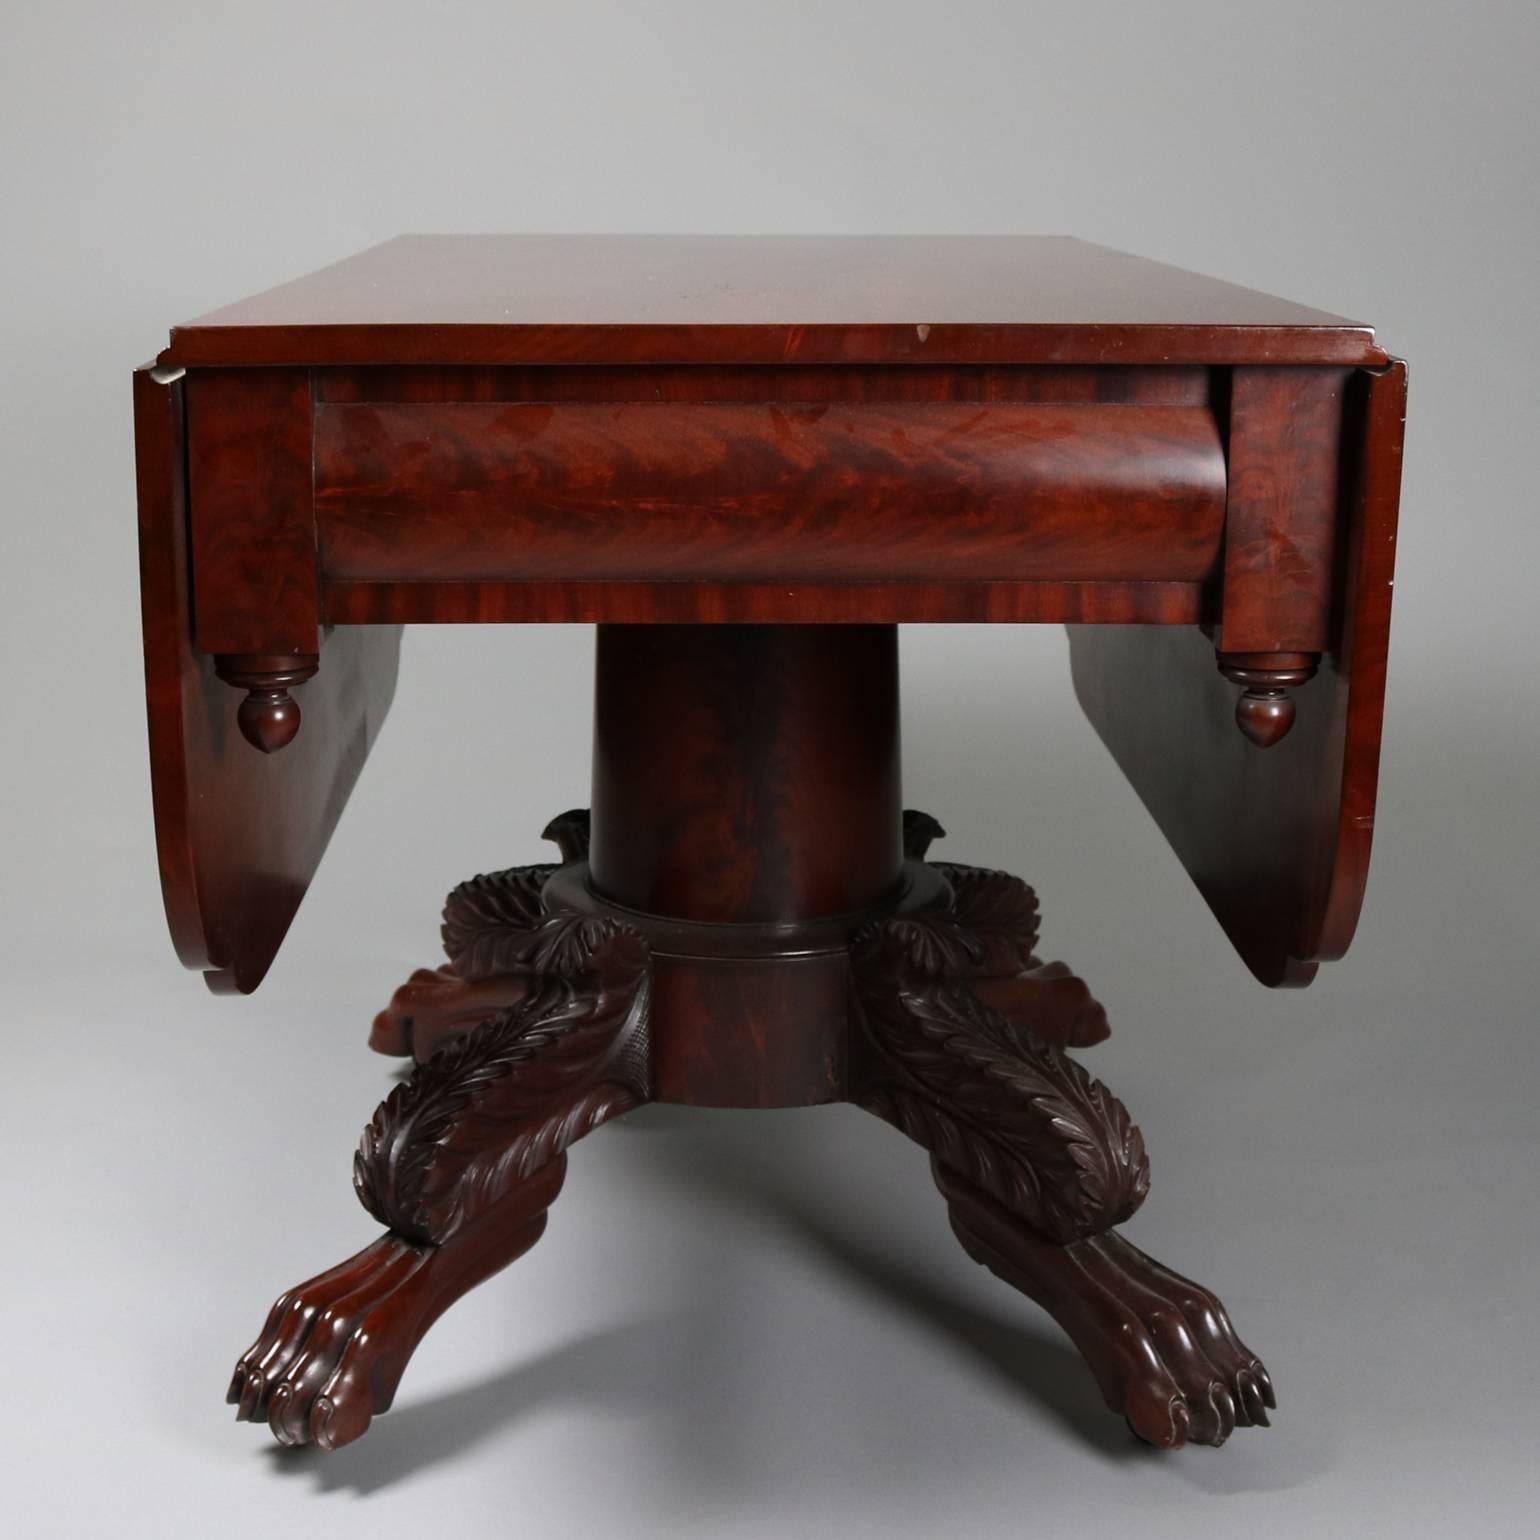 Antique Carved American Empire Flame Mahogany Pedestal Drop-Leaf Table 1